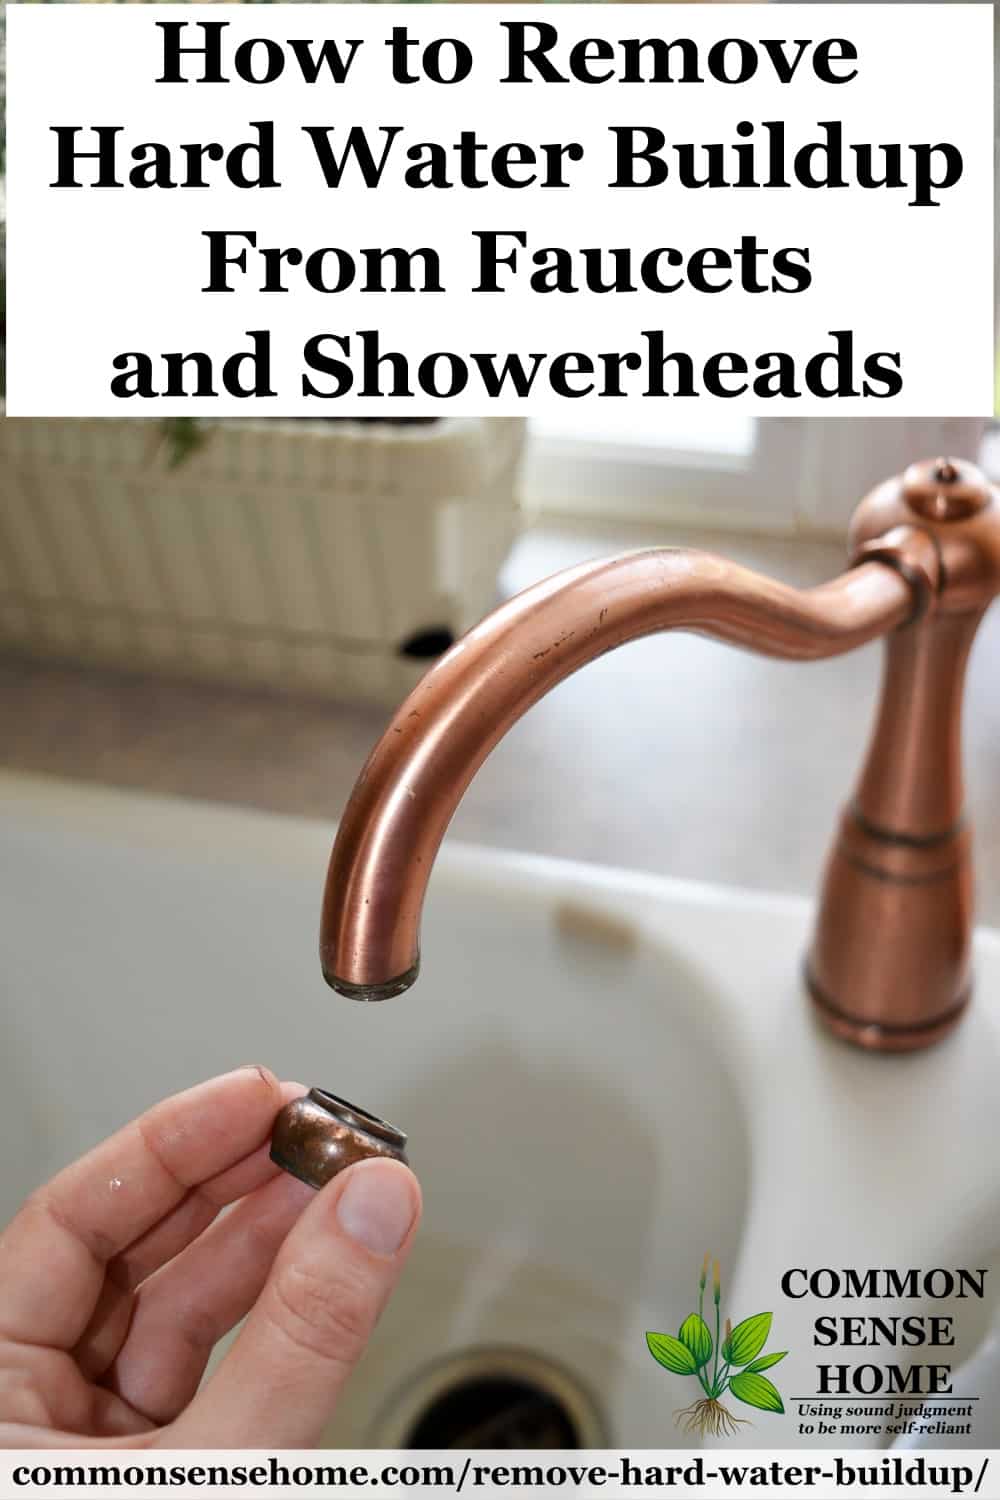 How to Remove Hard Water Buildup From Faucets and Showerheads